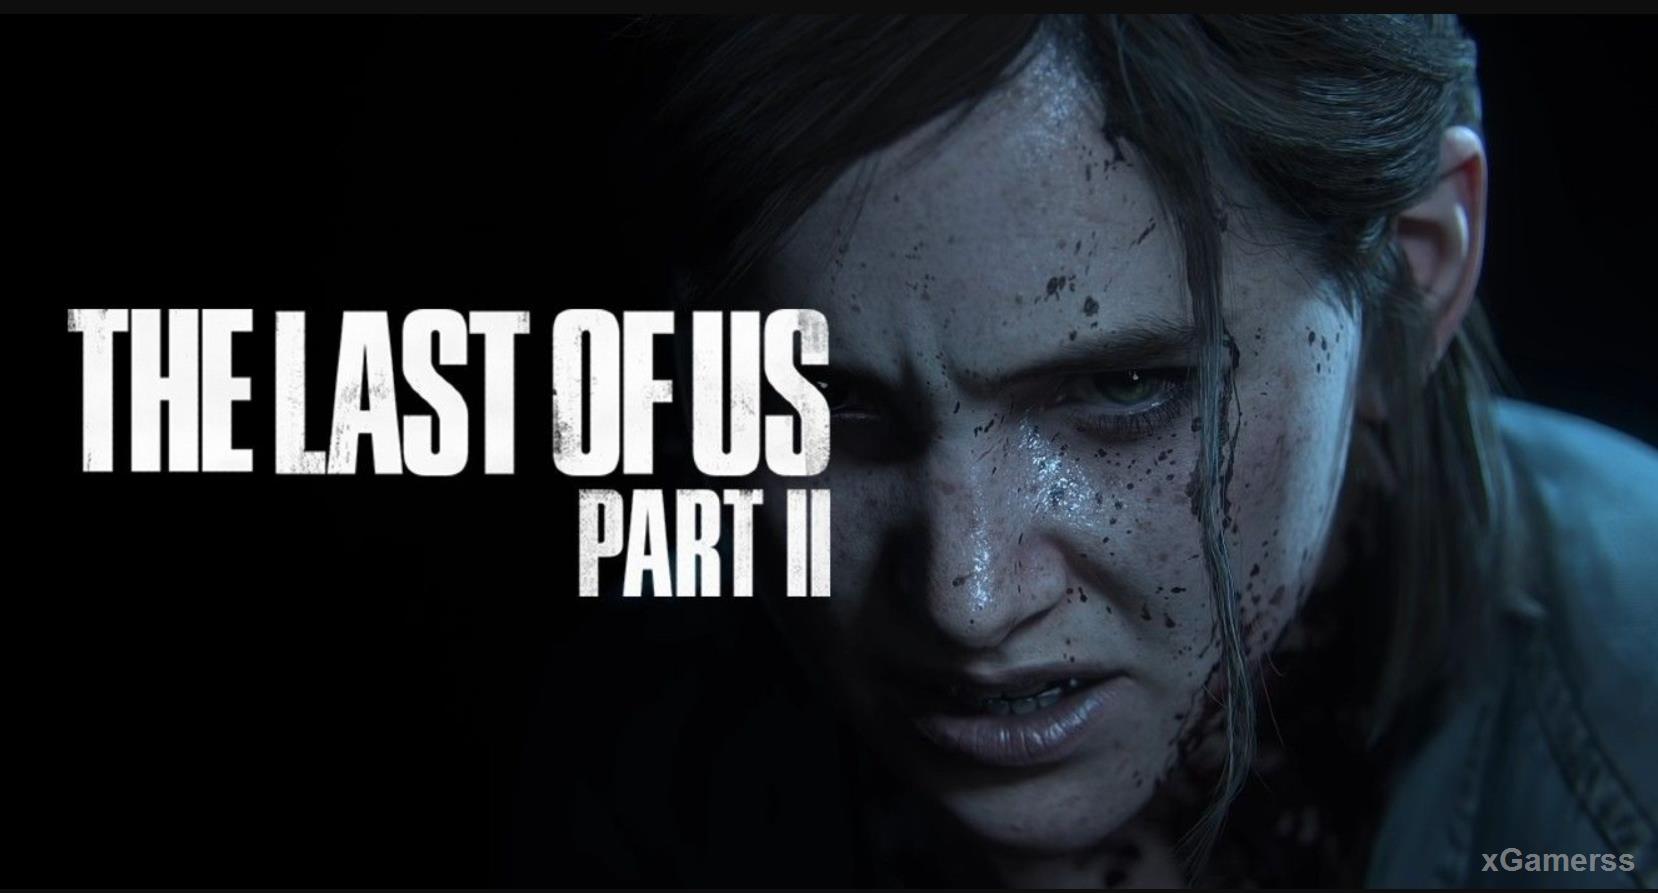 The LAST OF US 2